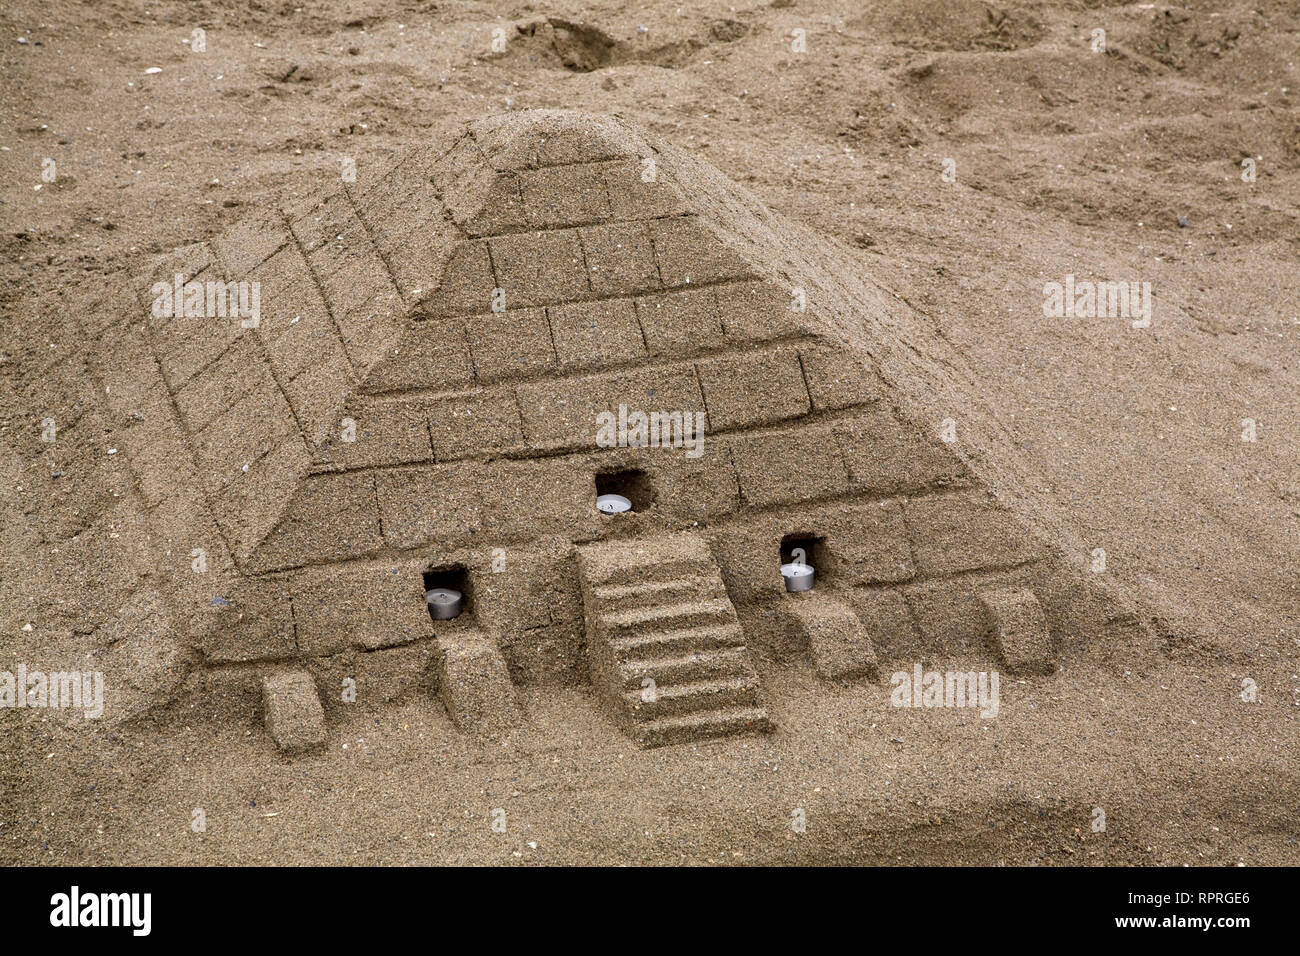 Close-up of an Egyptian pyramid shaped sandcastle Stock Photo